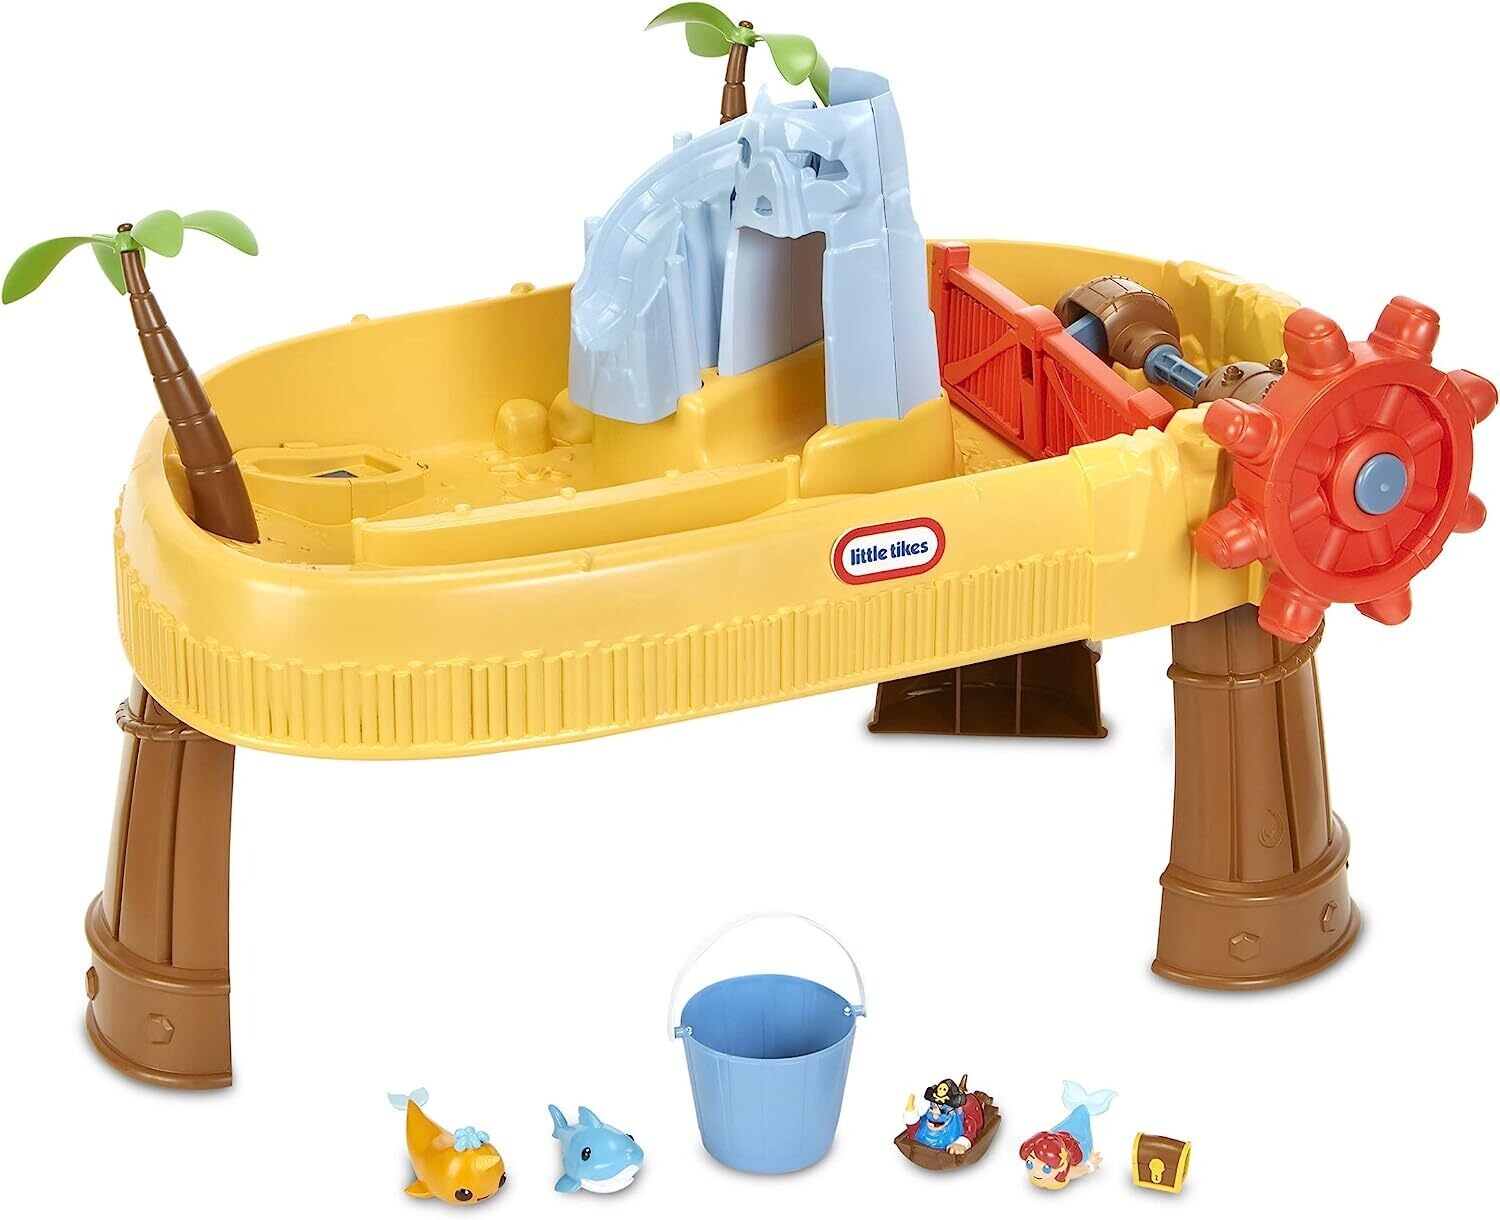 Outdoor Garden Water Table Playset Island Wavemaker Safe, Durable and Portable for Toddlers